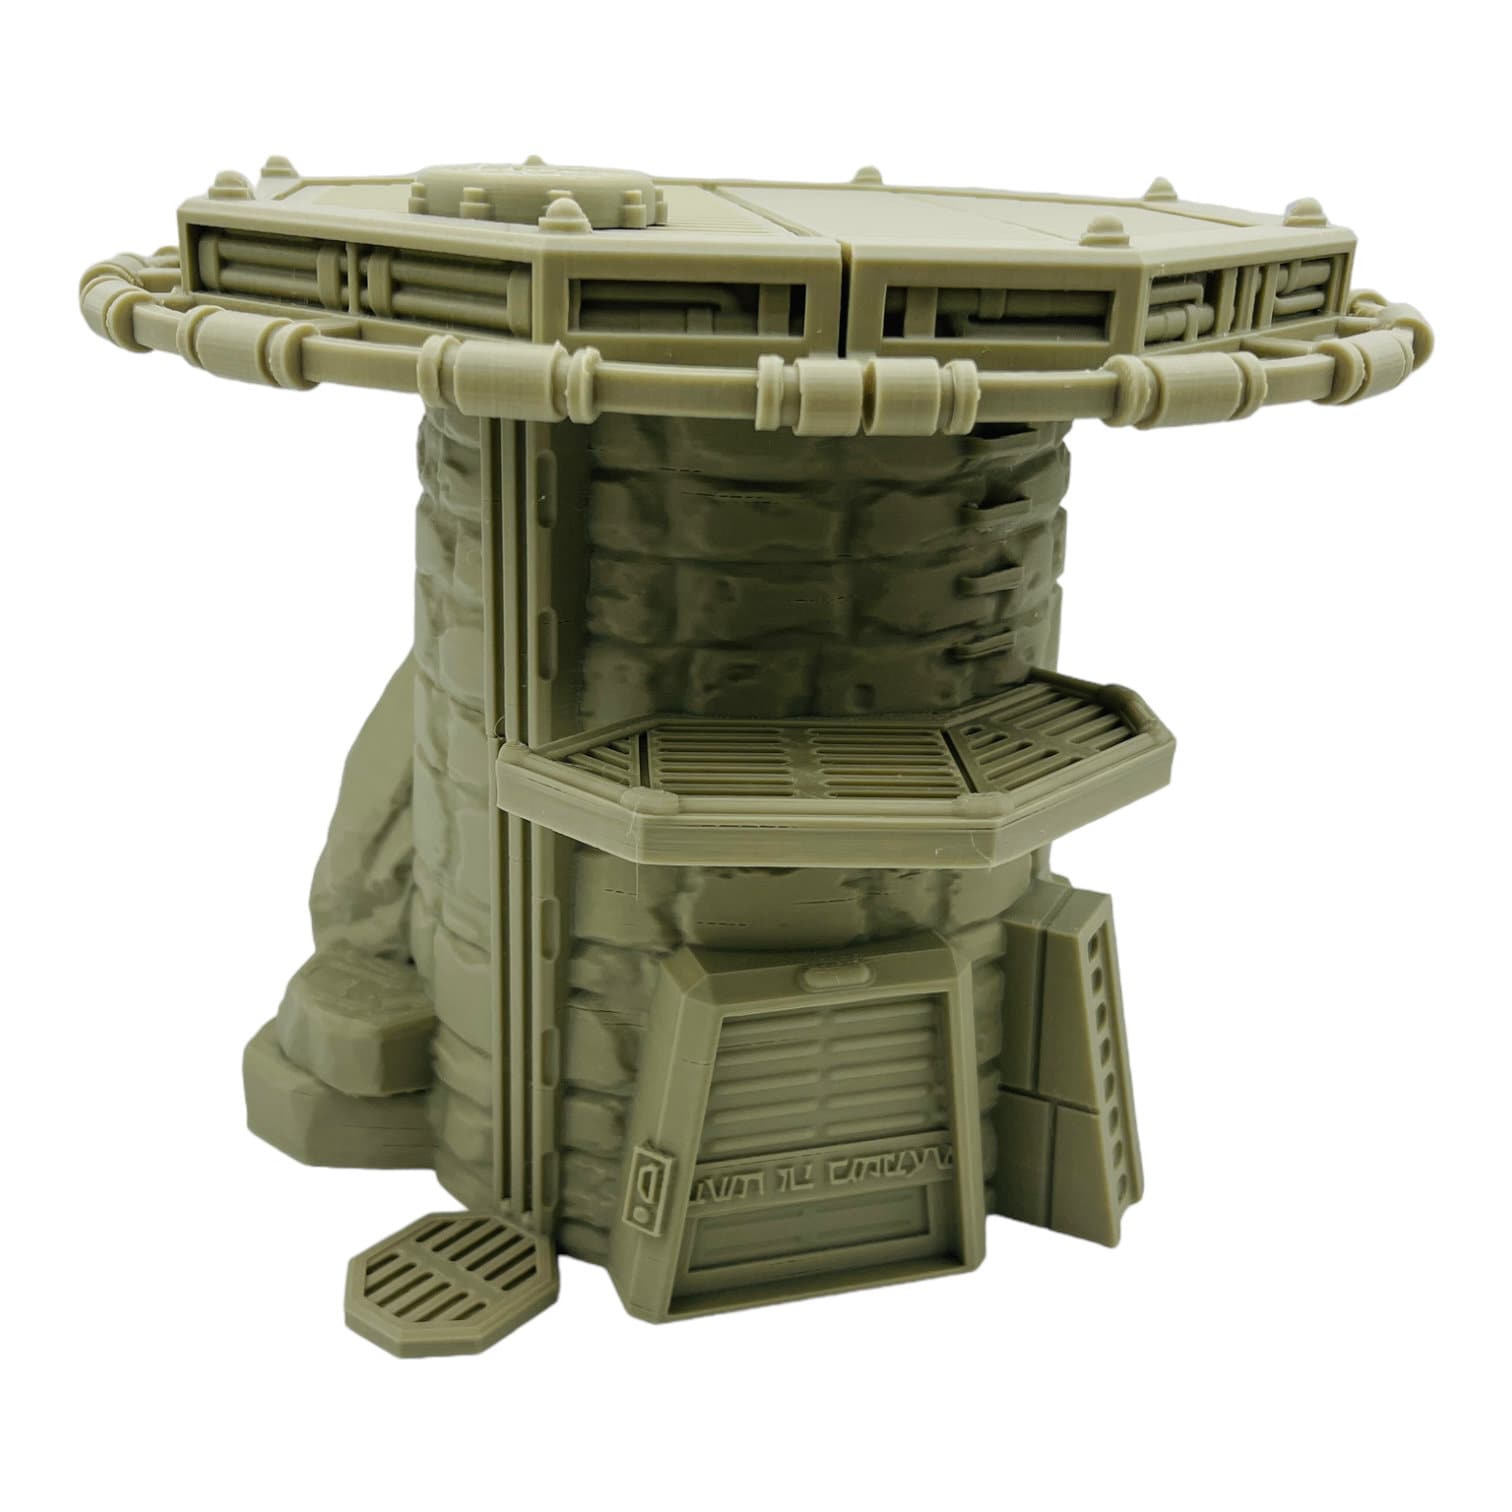 Ancient Starport Landing Pad/ Multiverse / Ancient / Legion and Sci-Fi 3D printed tabletop terrain for wargames / Licensed Printer